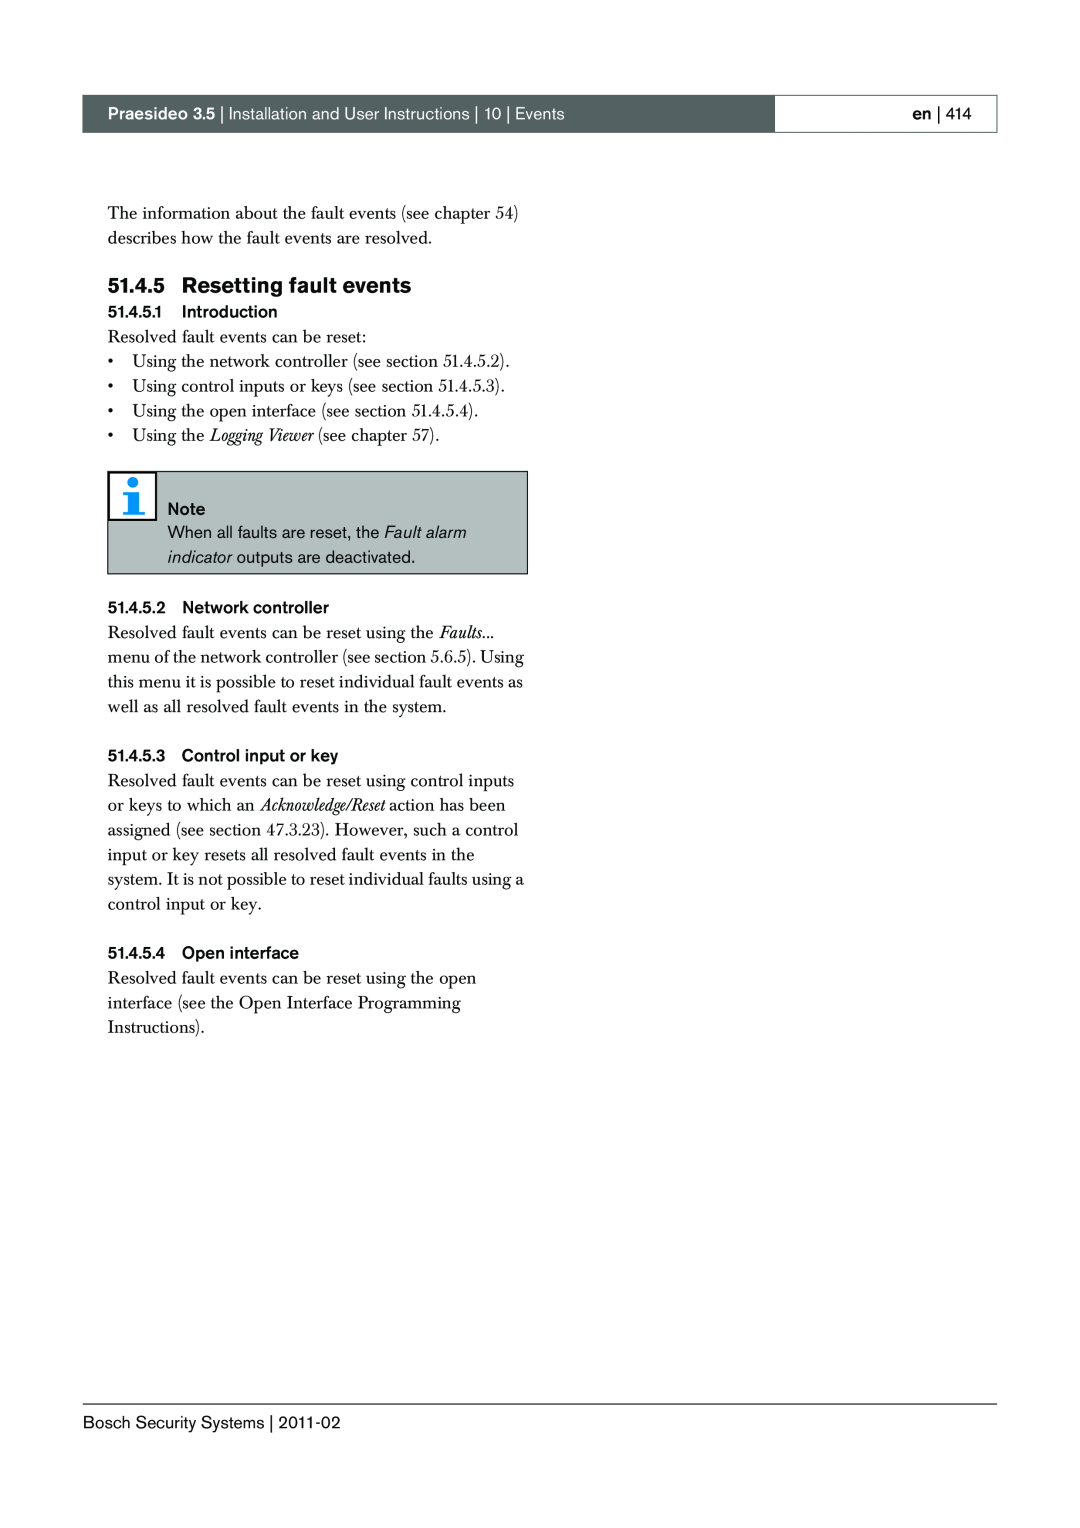 Bosch Appliances 3.5 manual Resetting fault events 